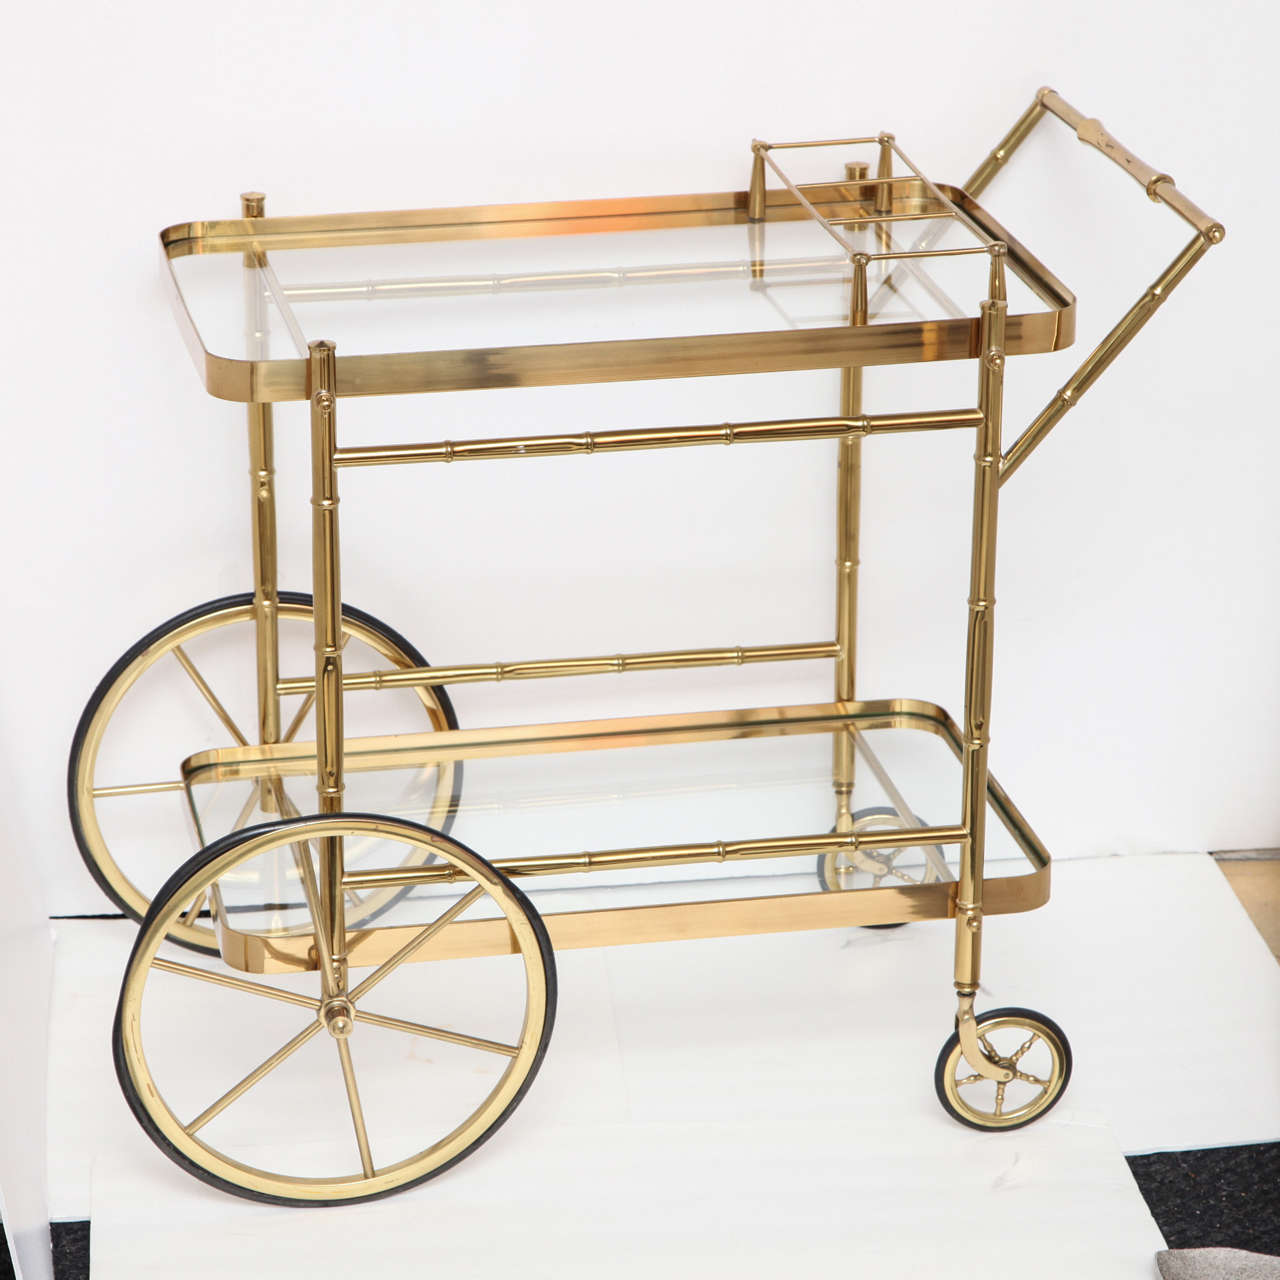 Decorative brass bar cart, circa 1960. 
The bar cart has now been polished and new rubber on the wheels.